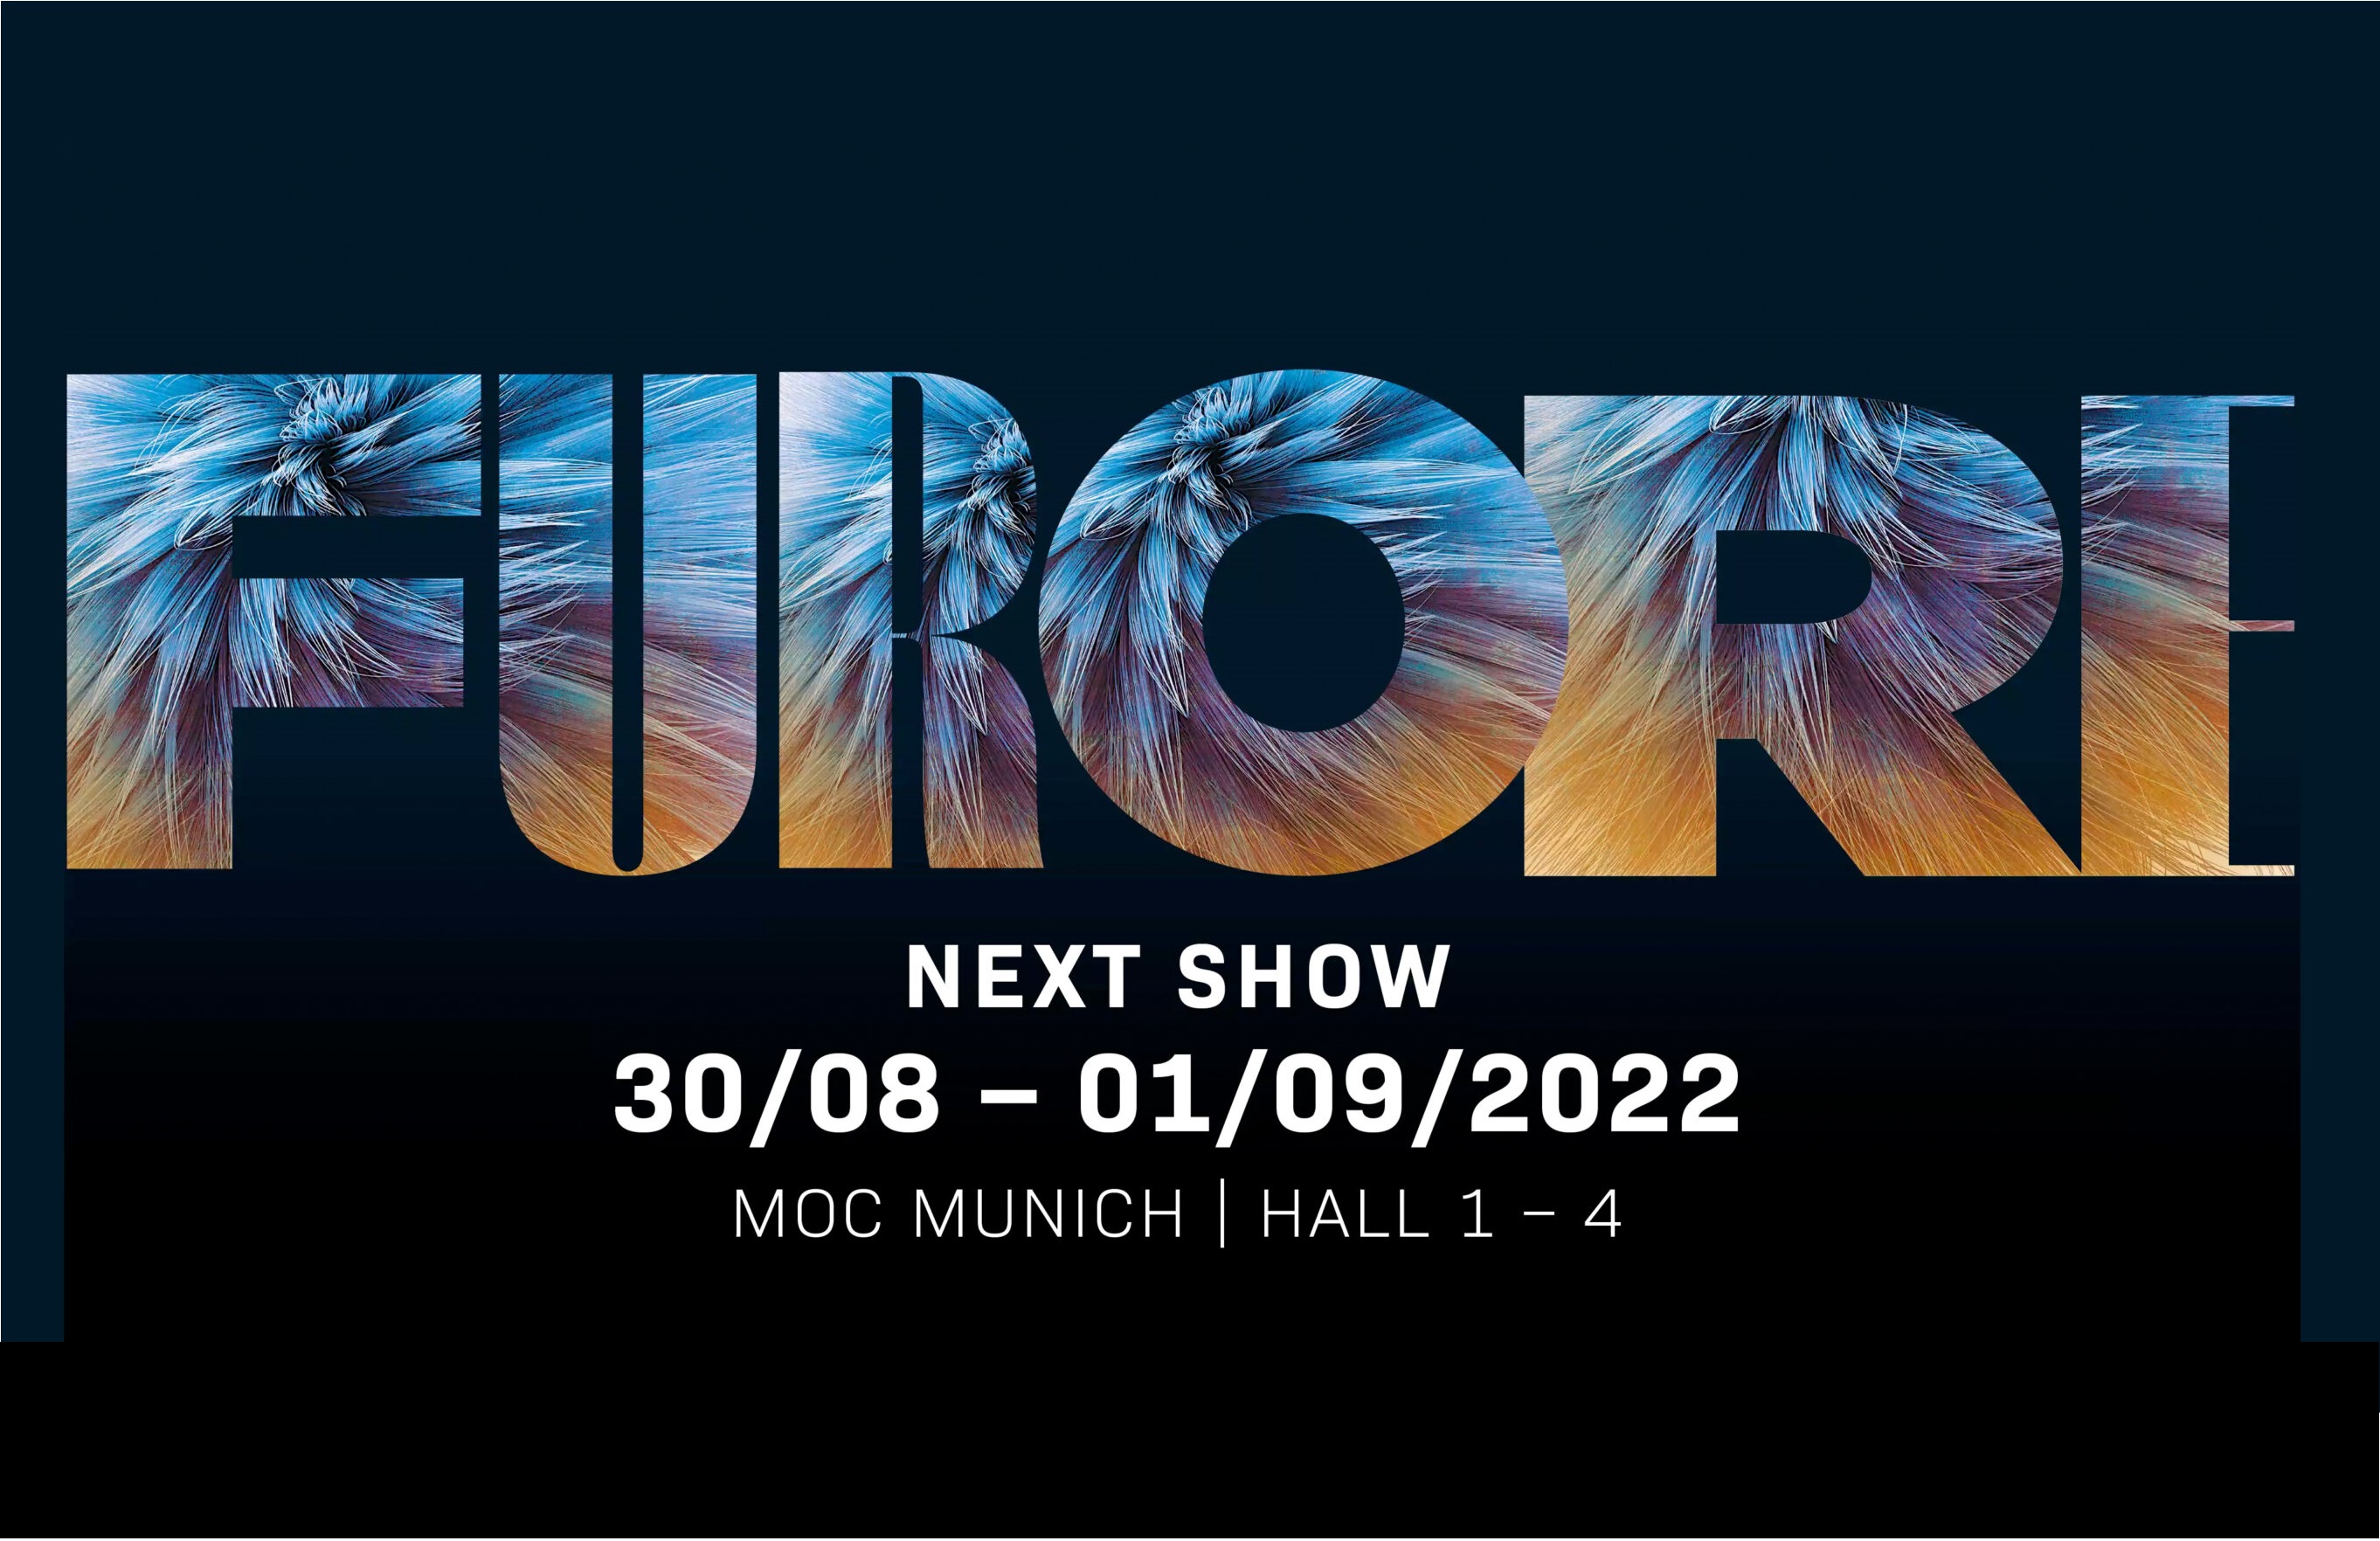 With several new innovations, upcoming Munich Fabric Start to be bigger